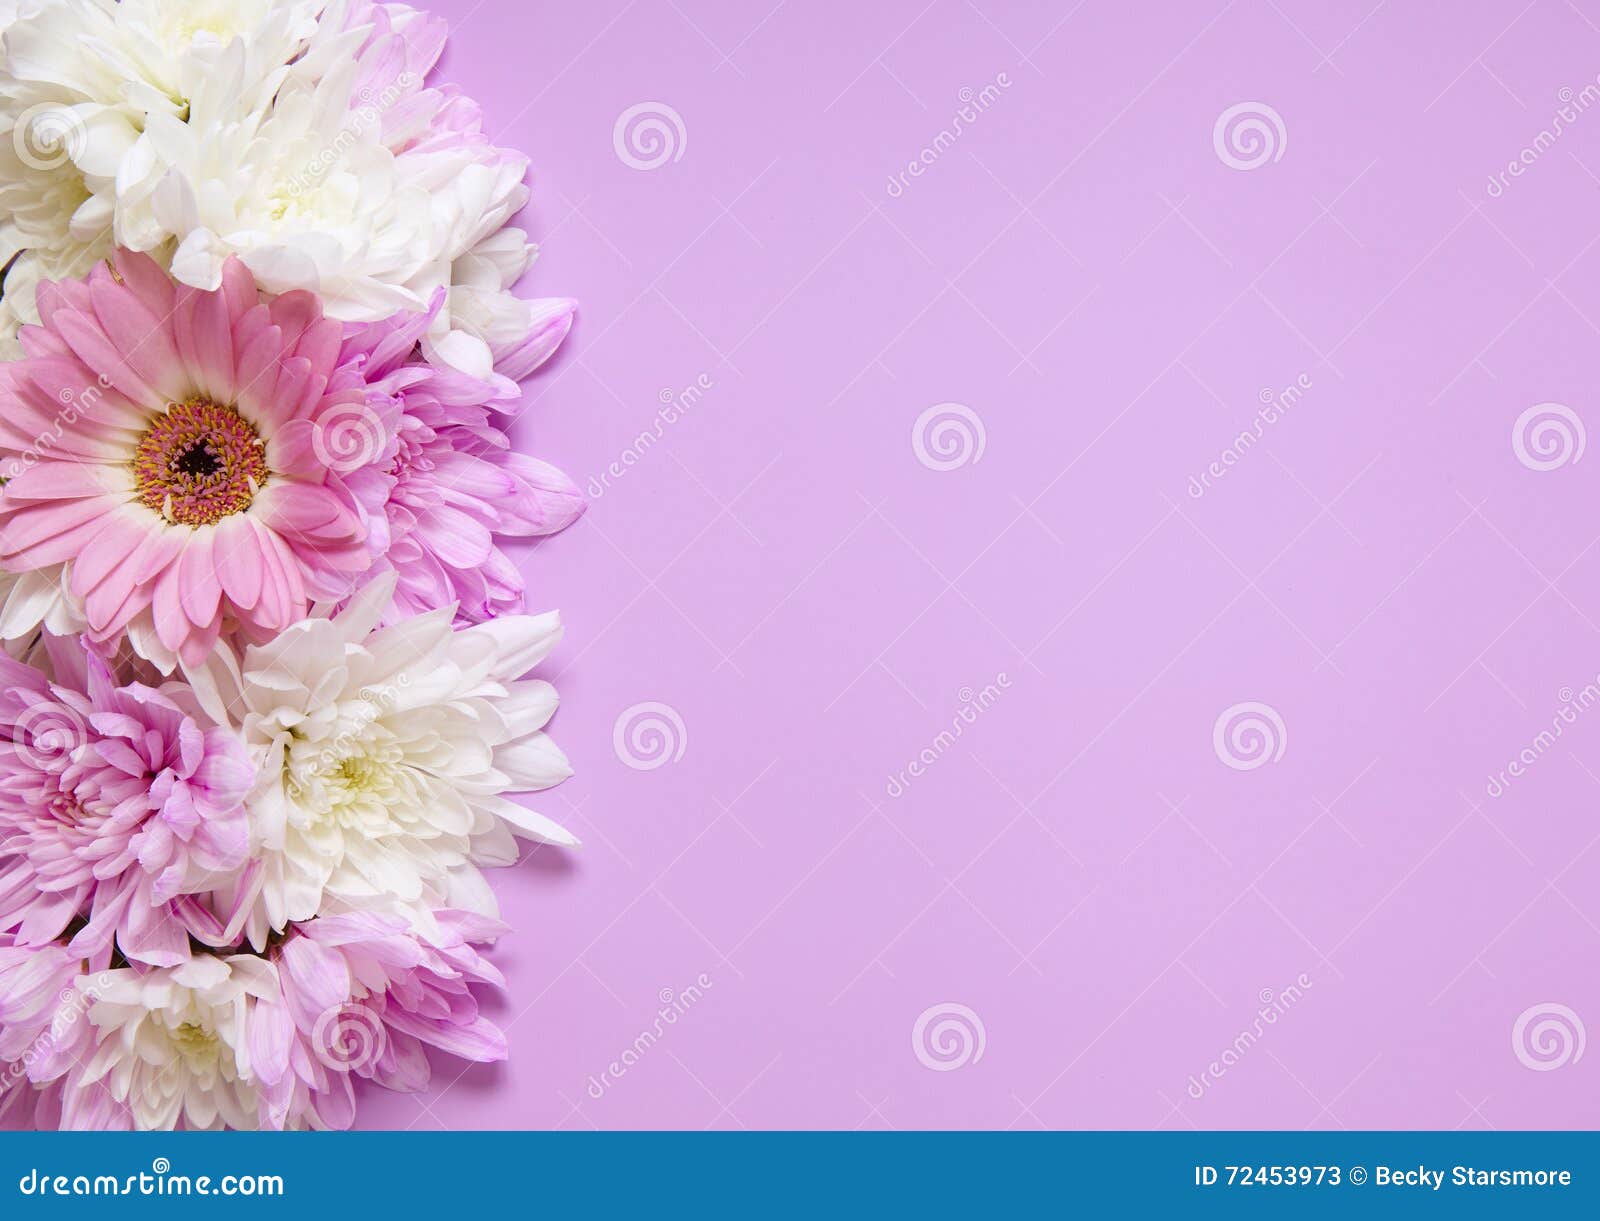 Floral Header Footer Stock Images - Download 8 Photos